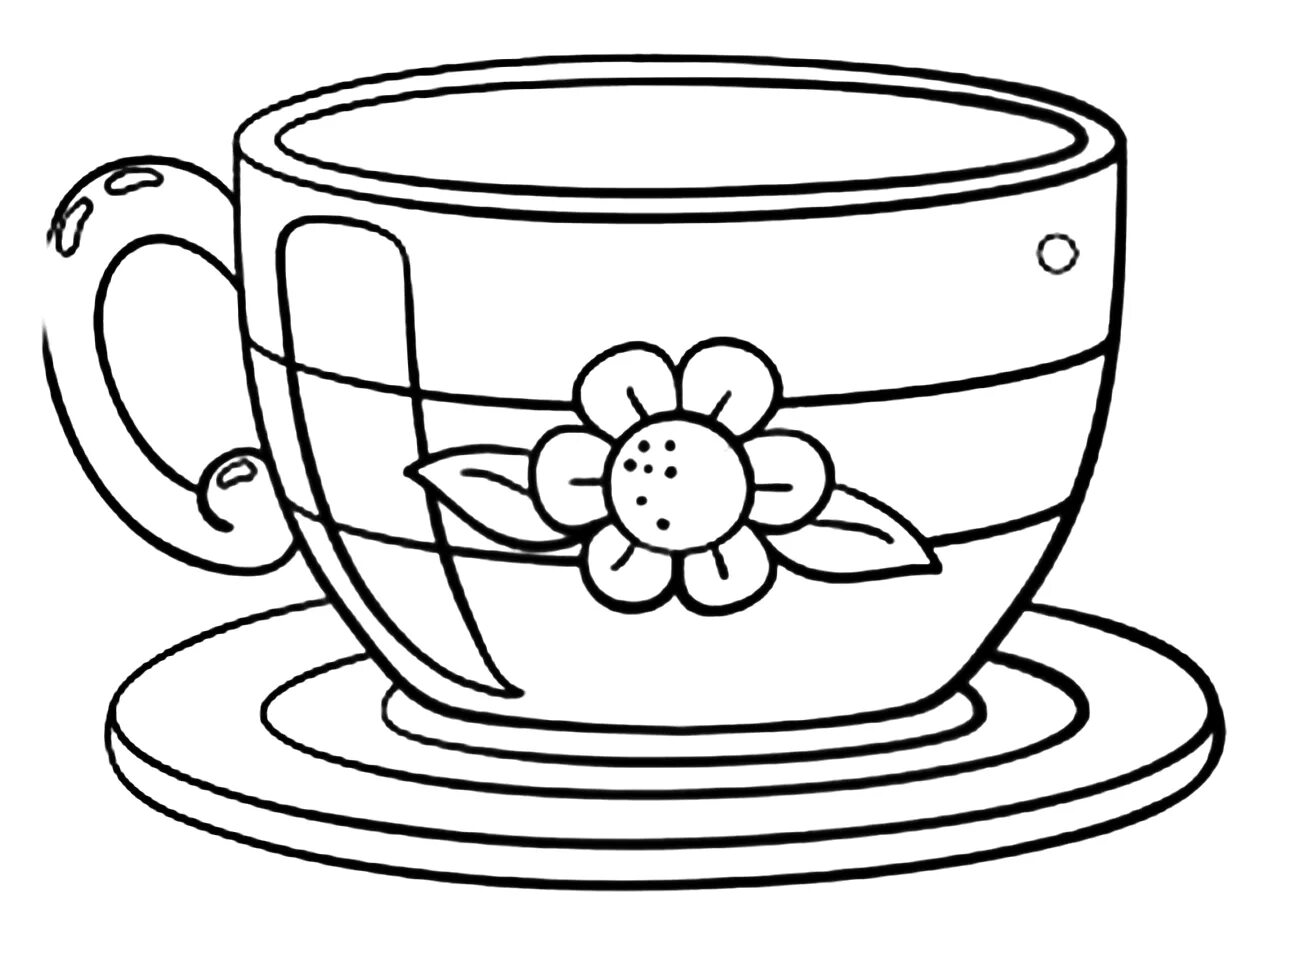 Trendy tea cup coloring book for kids